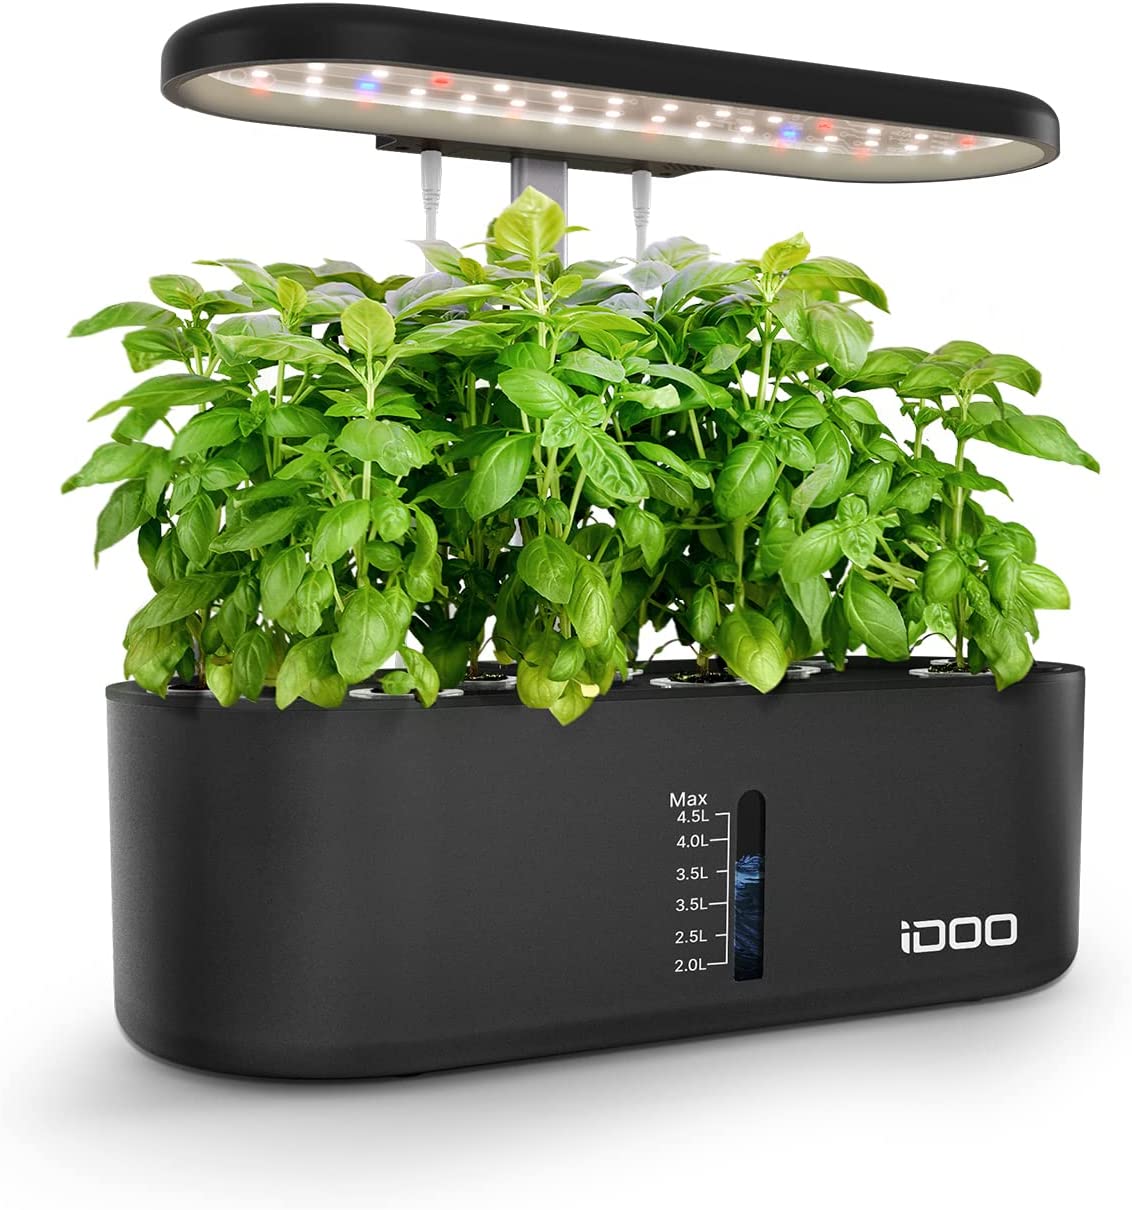 iDOO Hydroponics Growing System, 10 pods Indoor Herb Garden with LED Grow Light, Auto Timer Smart Garden, Water Shortage Alarm